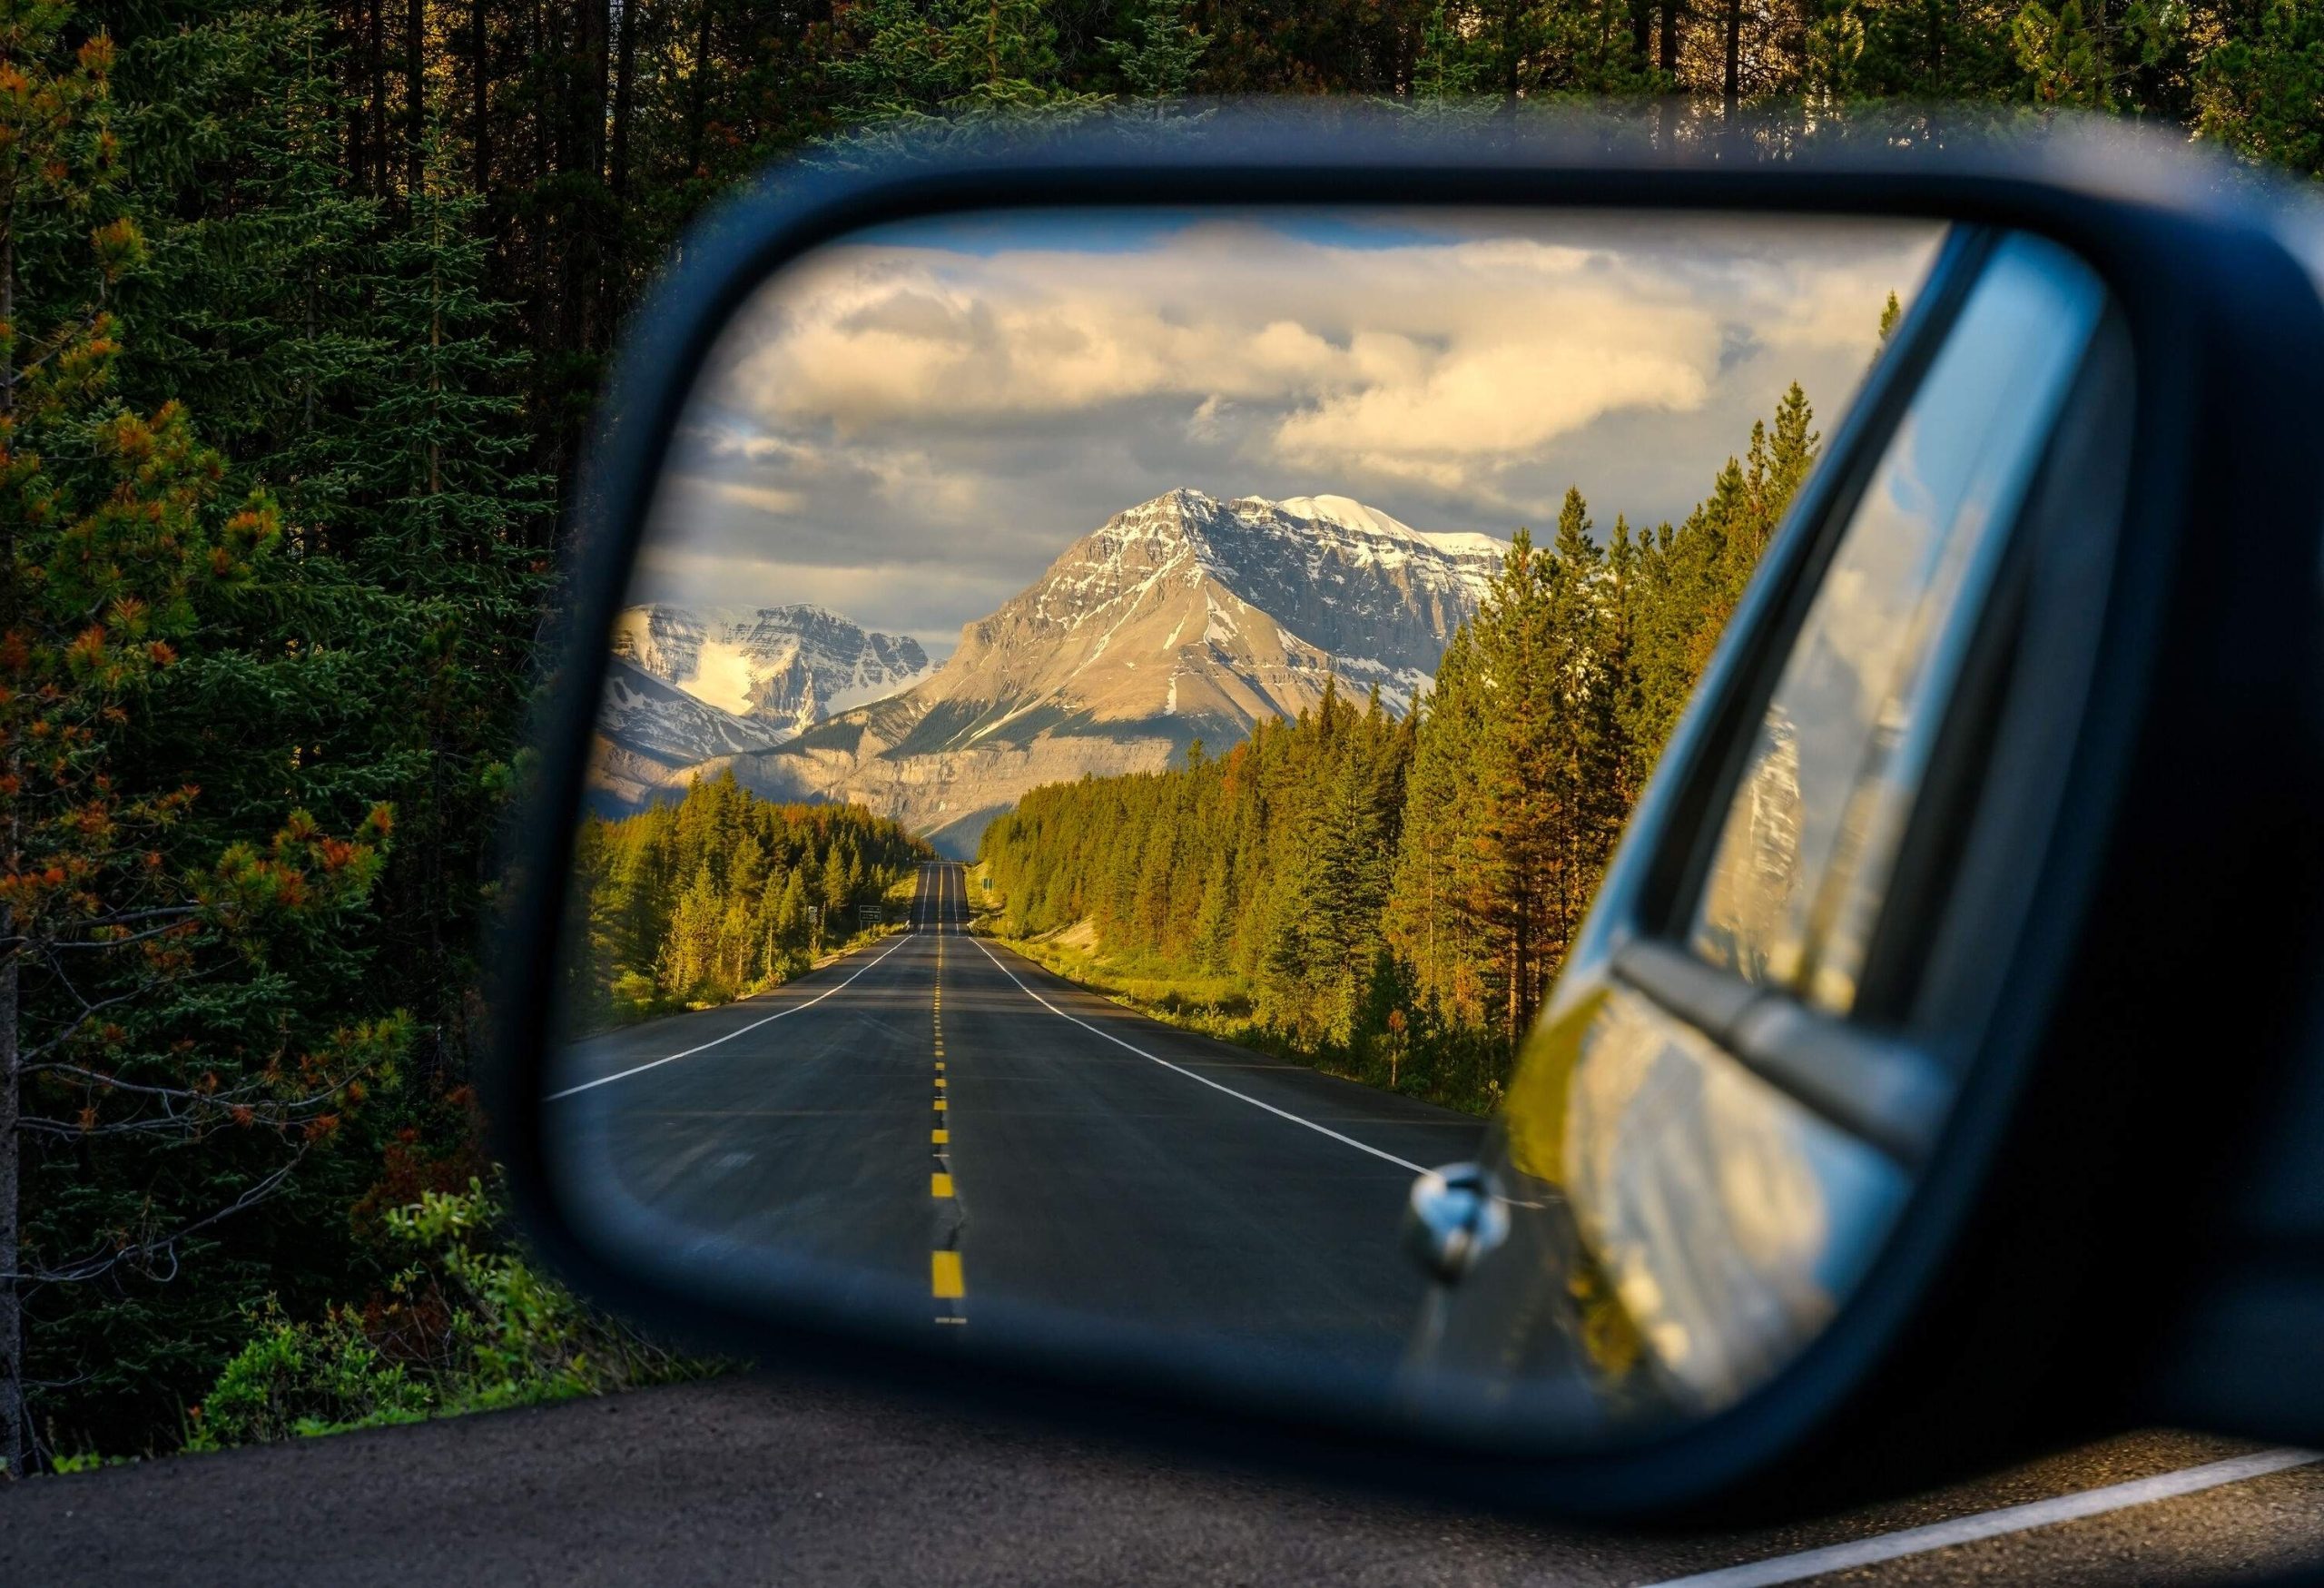 A car's side mirror with a reflection of an empty highway across a forested landscape with a snow-capped mountain in the background.